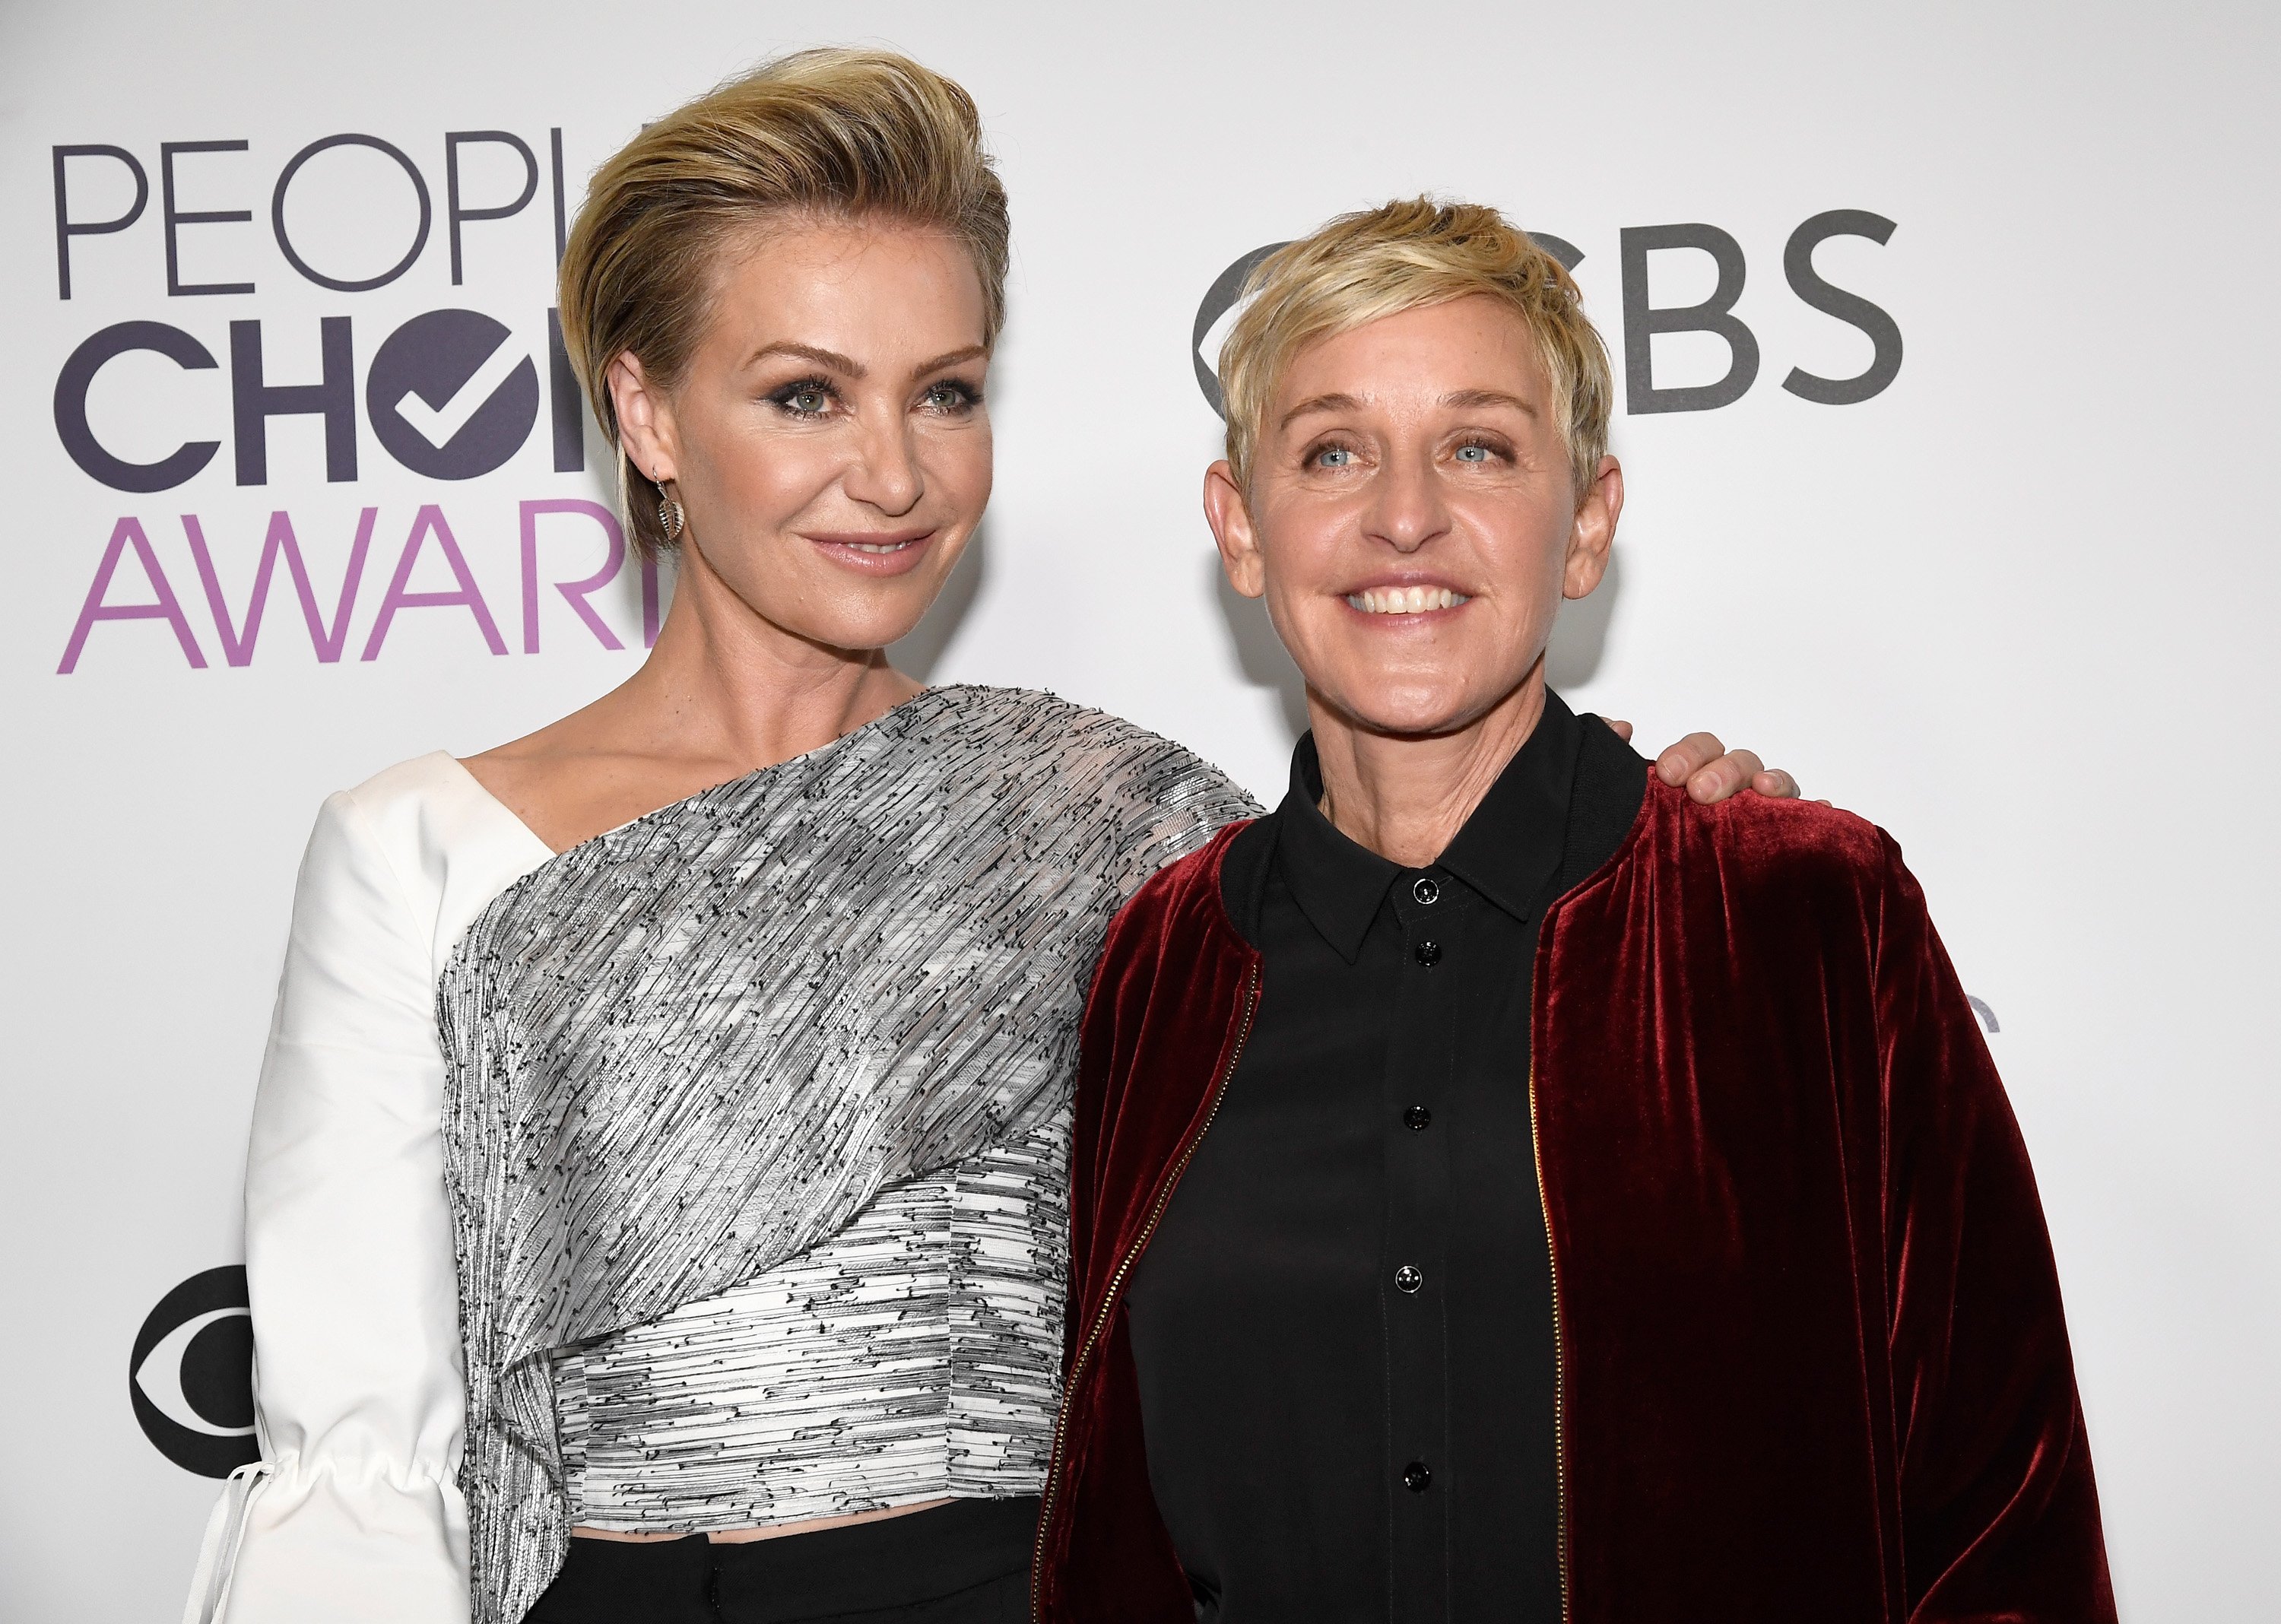 Ellen DeGeneres and wife Portia De Rossi attend the People's Choice Awards in Los Angeles, California on January 18, 2017 | Photo: Getty images